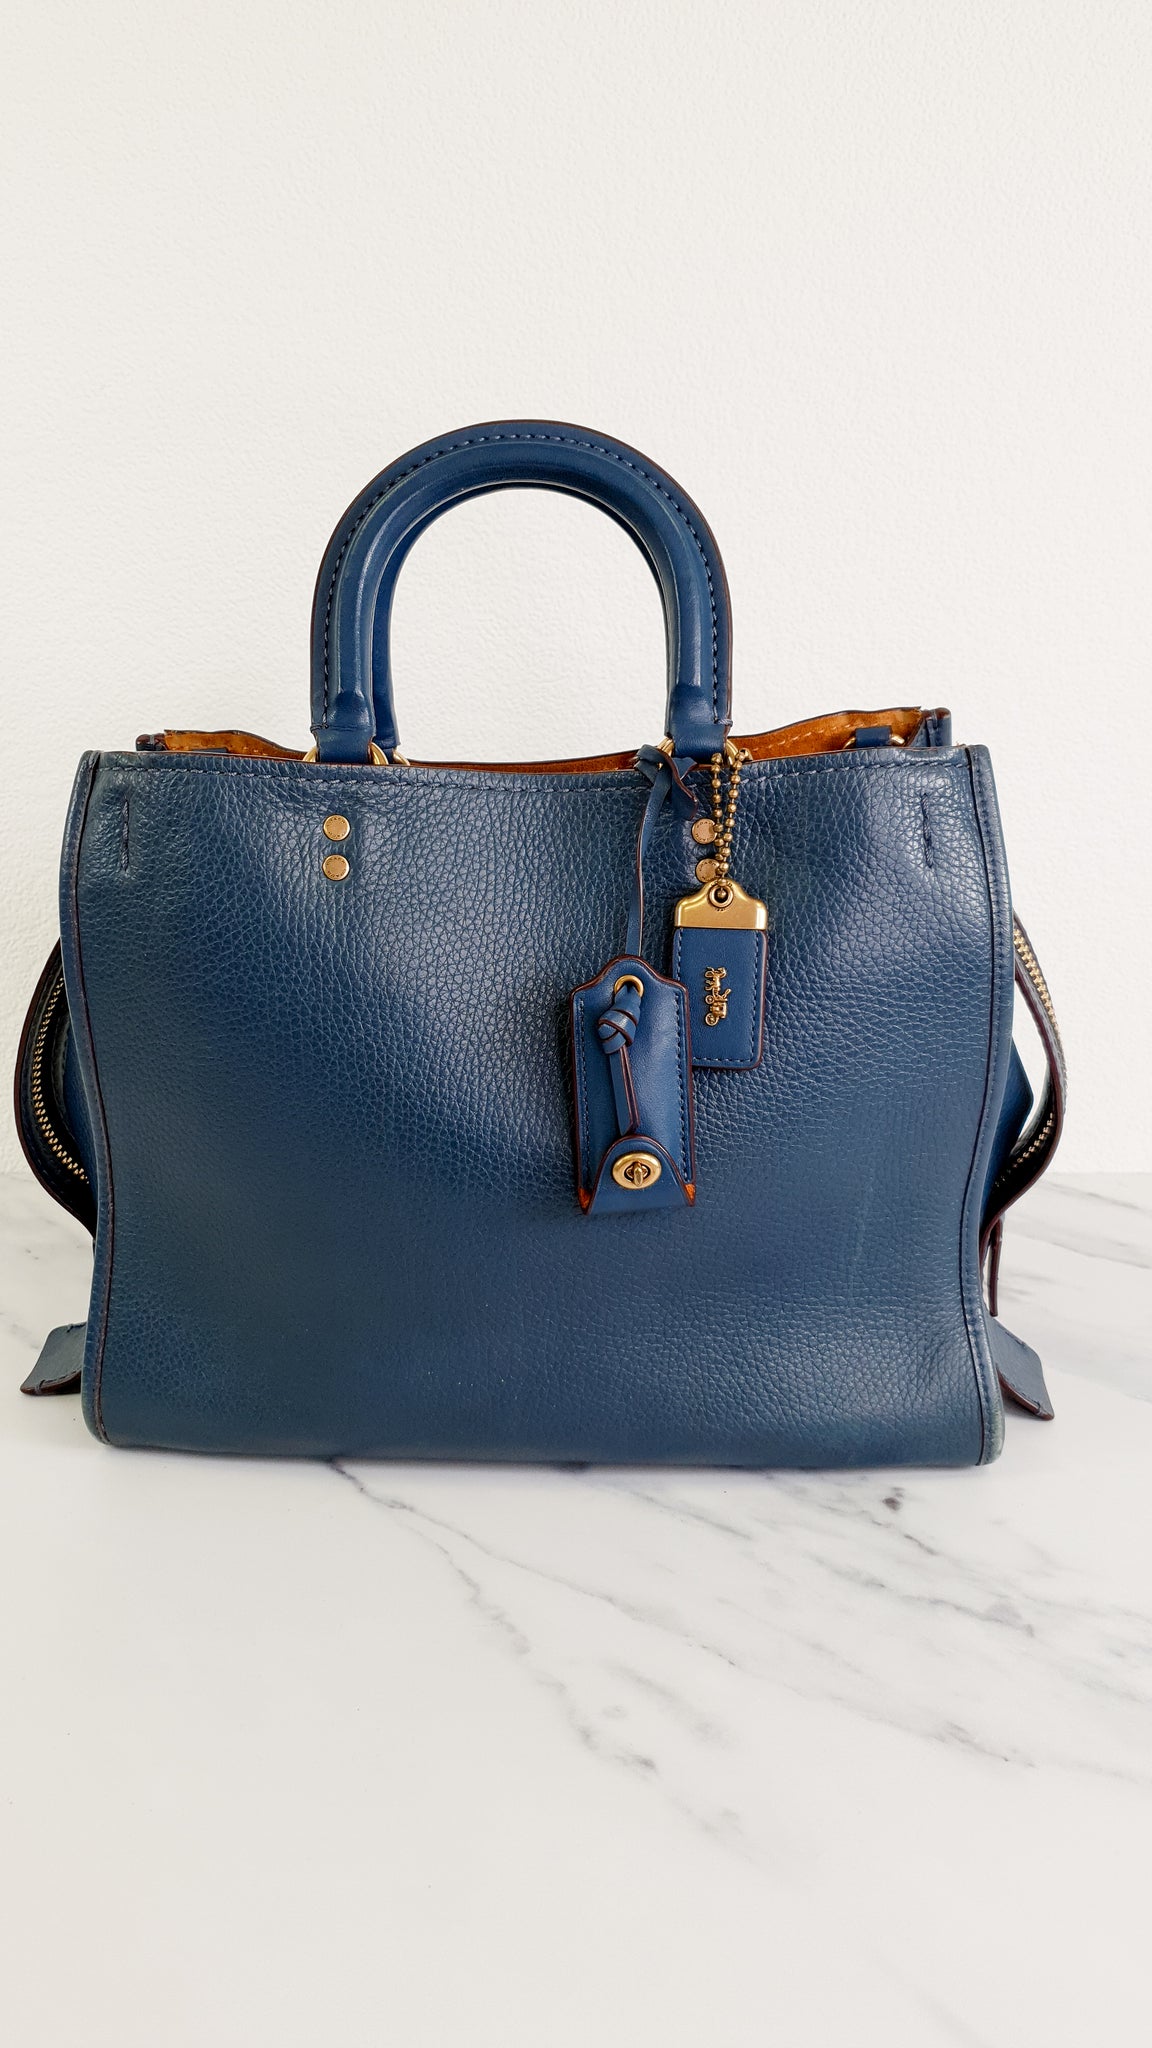 Coach Blue/Silver Denim and Leather Tote